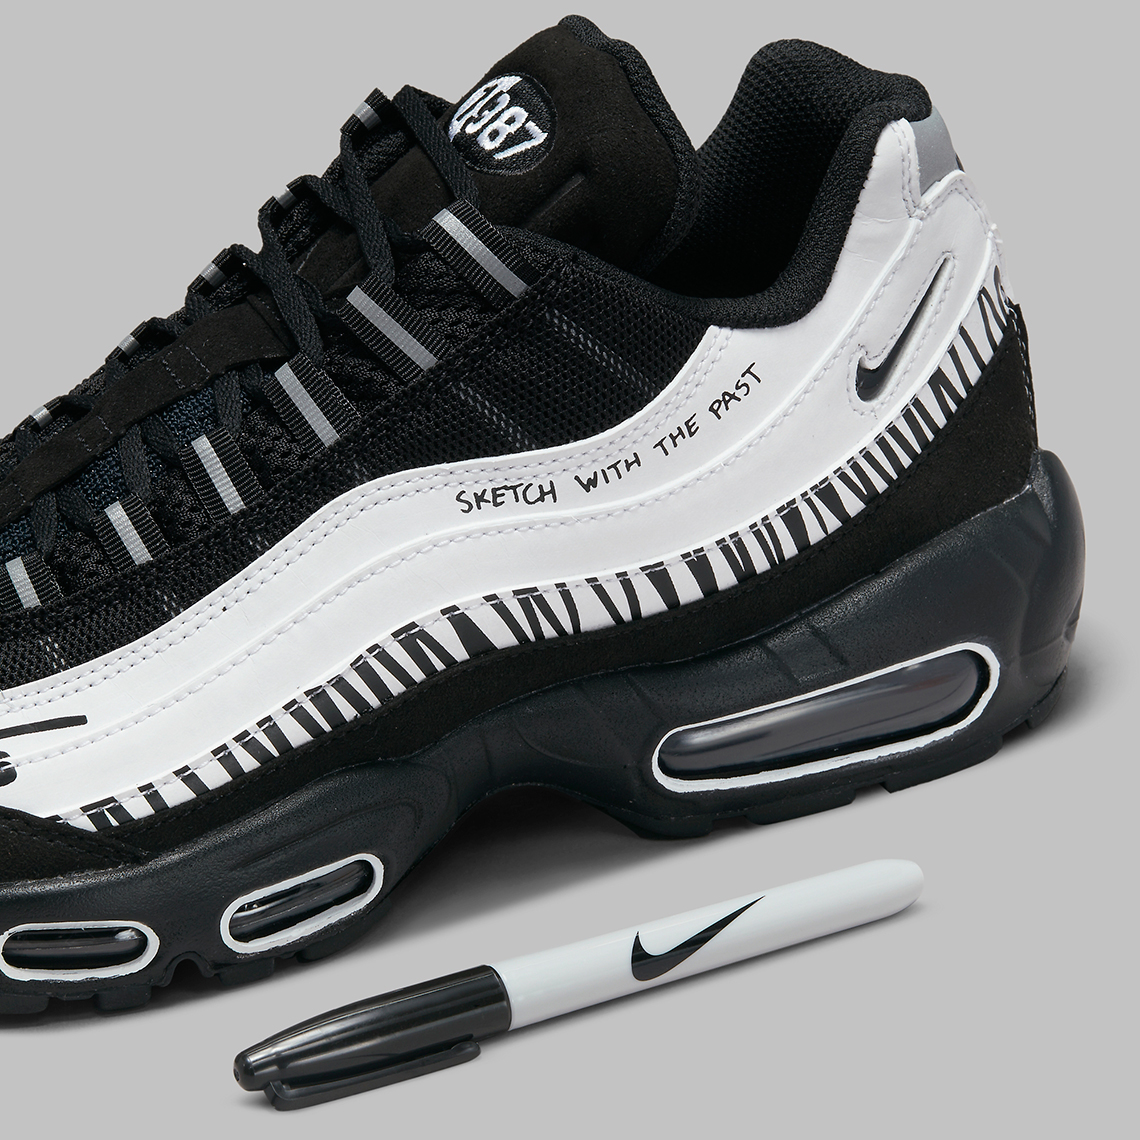 nike air max 95 sketch with the past dx4615 100 6